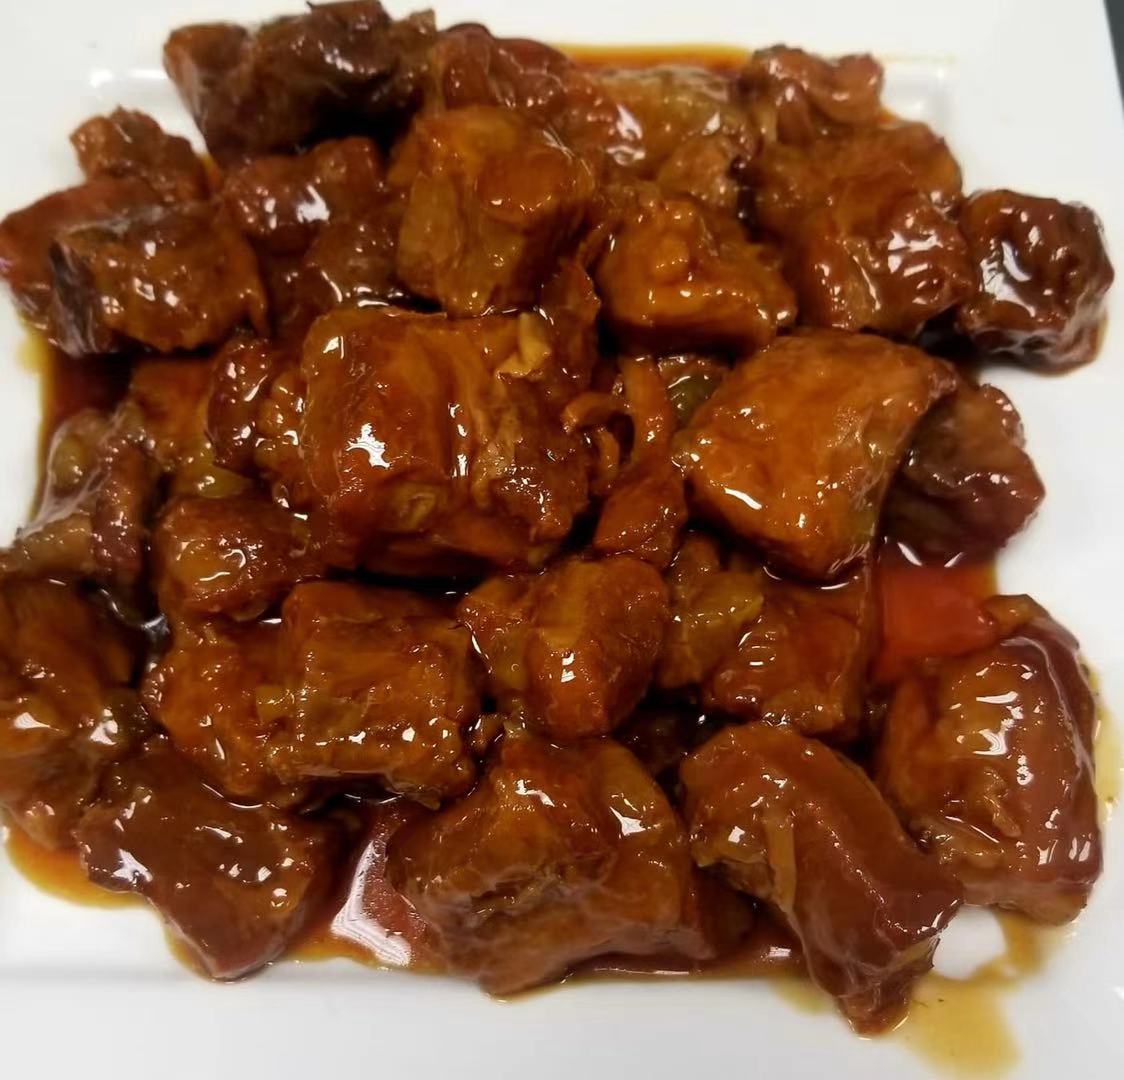 192. Sweet and Sour Spareribs